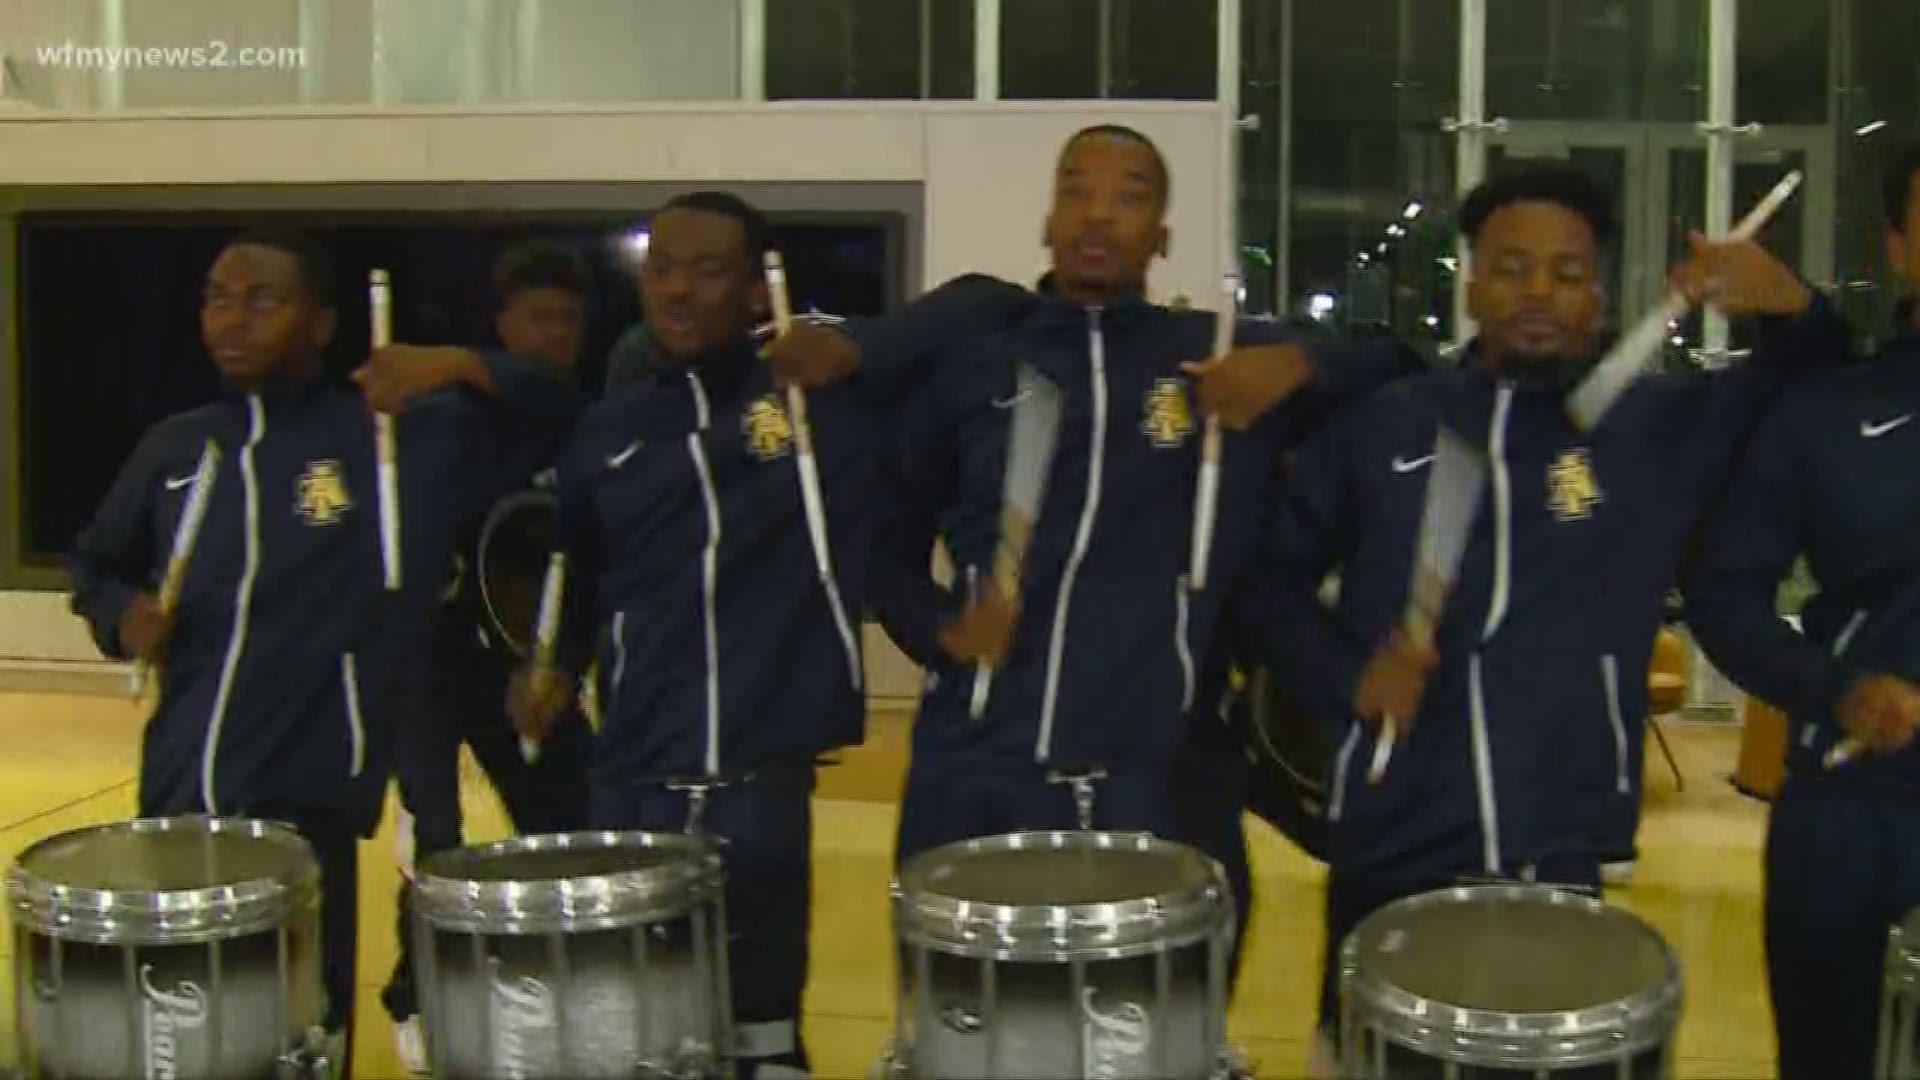 N.C.A&T Celebrates Annual Homecoming